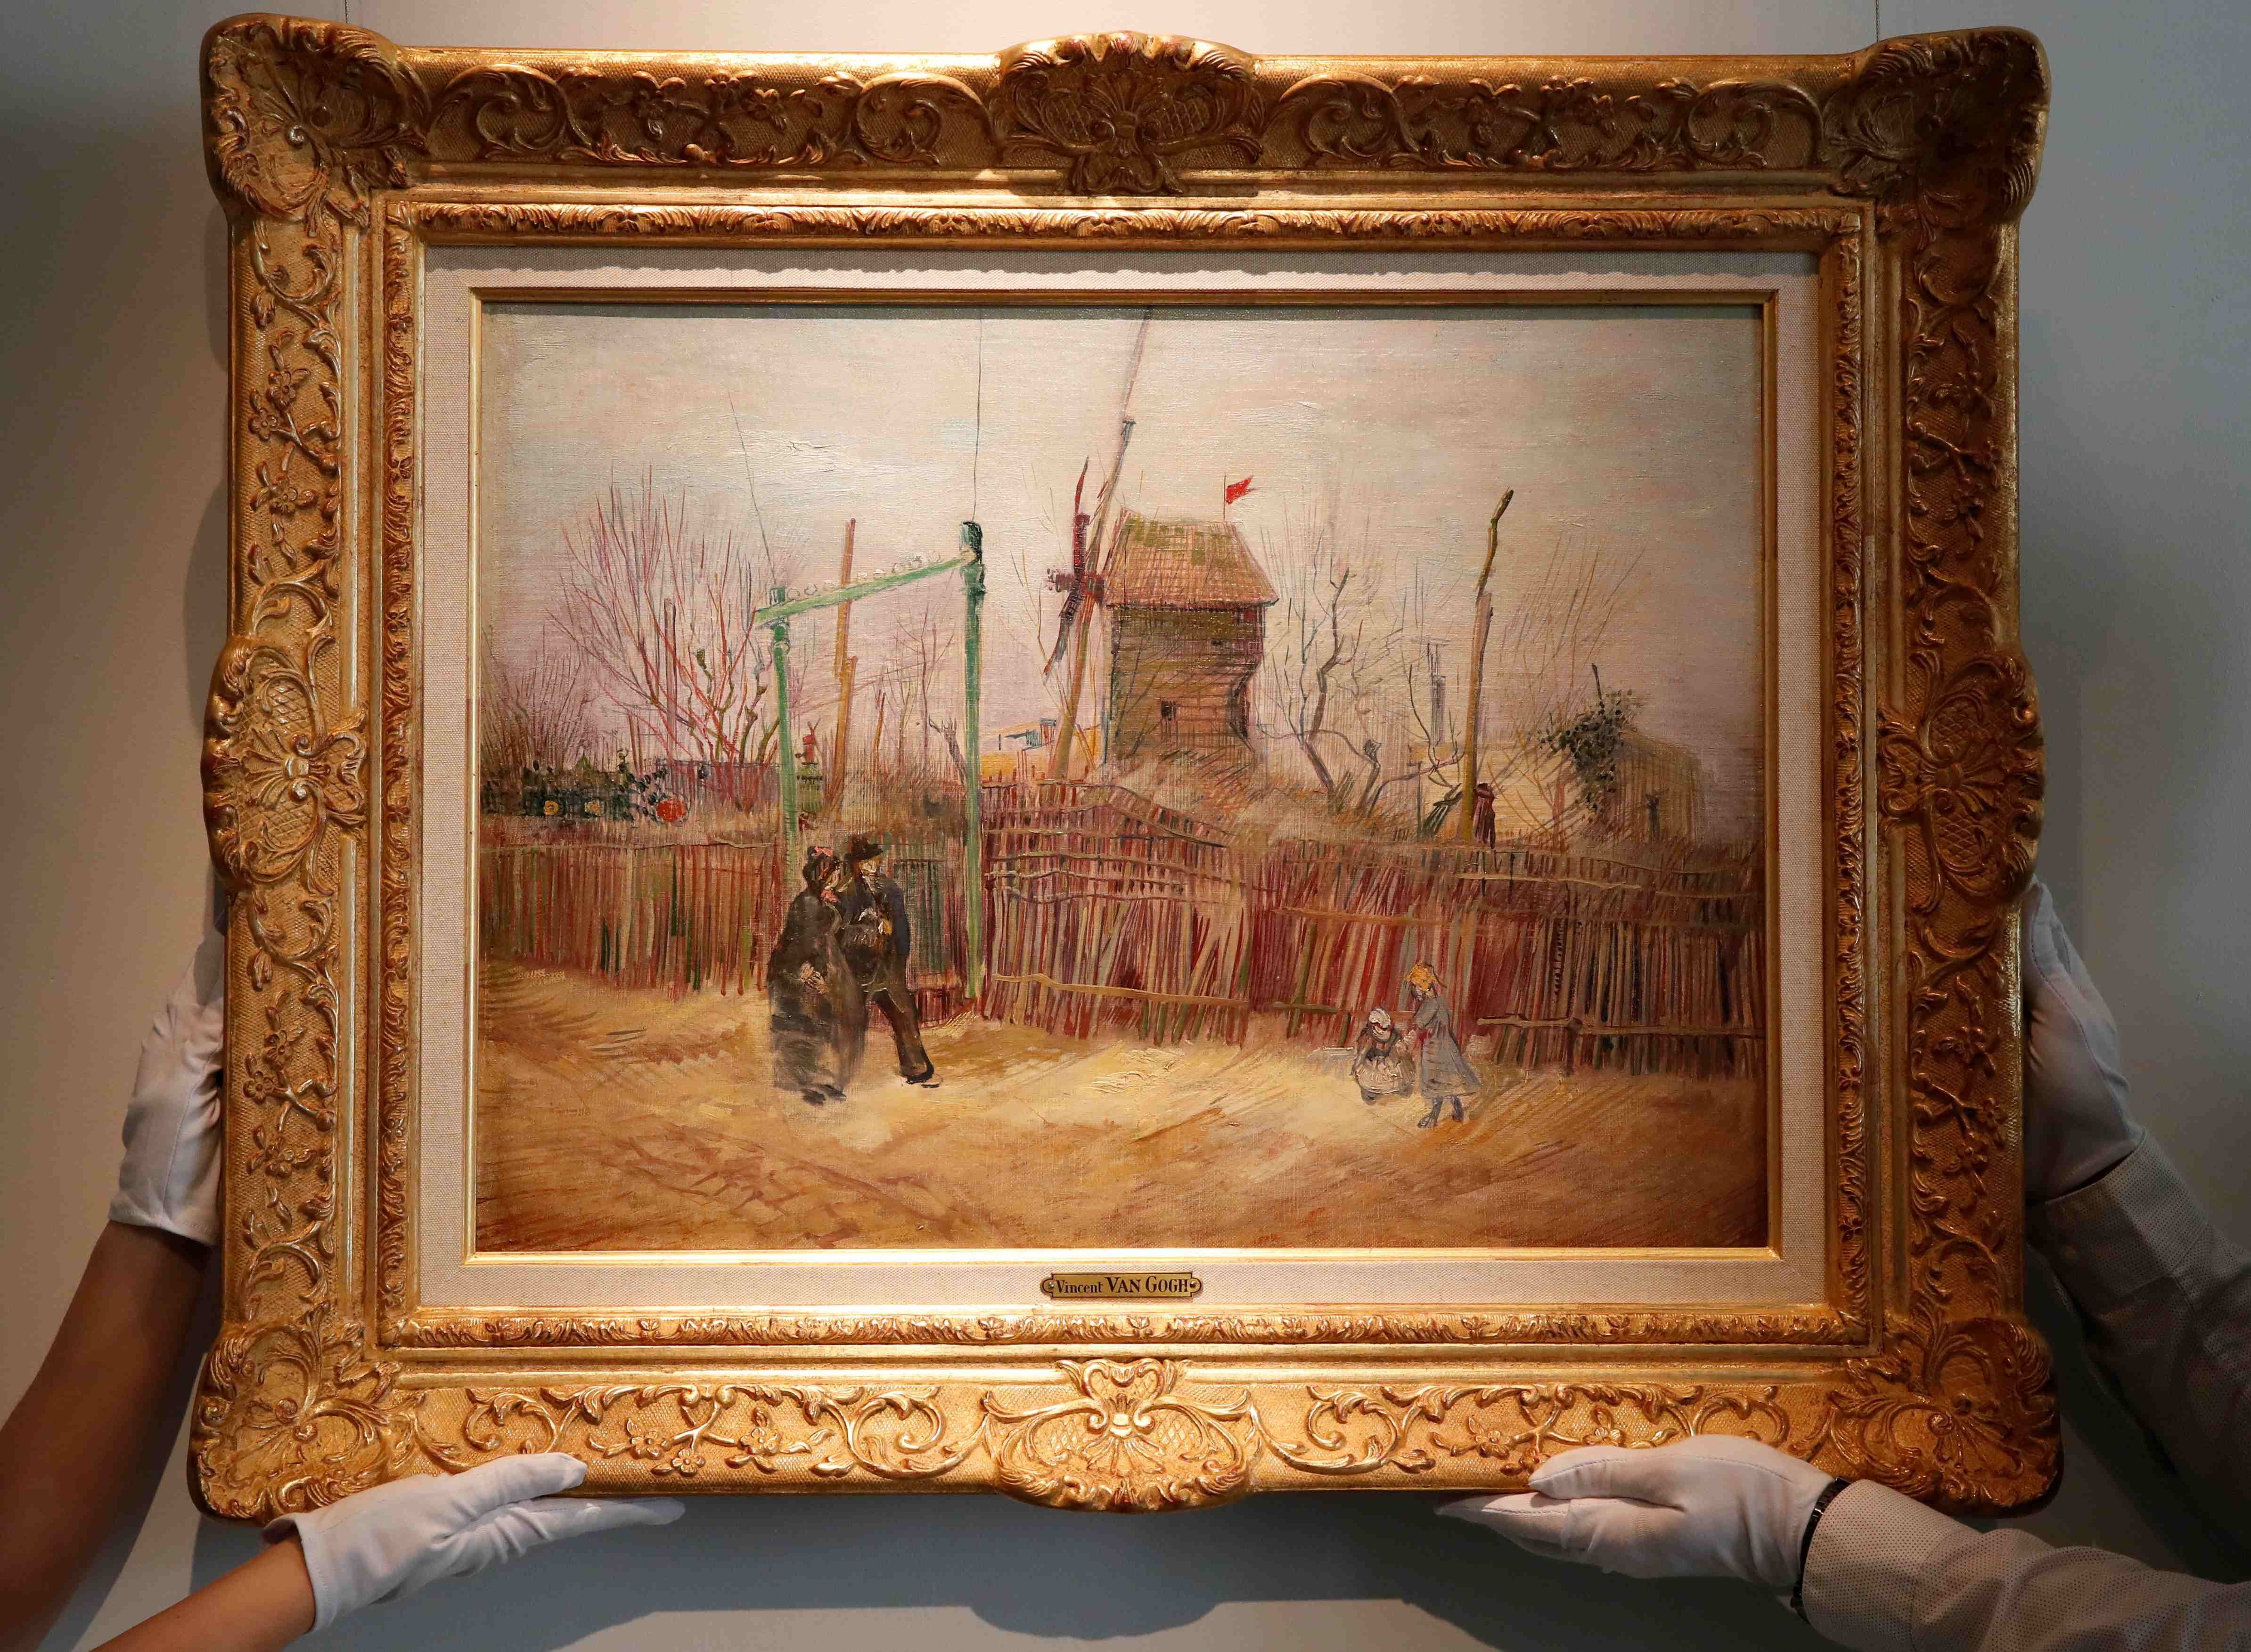 Van Gogh’s ‘Street scene in Montmartre’ sold for $15 million at auction